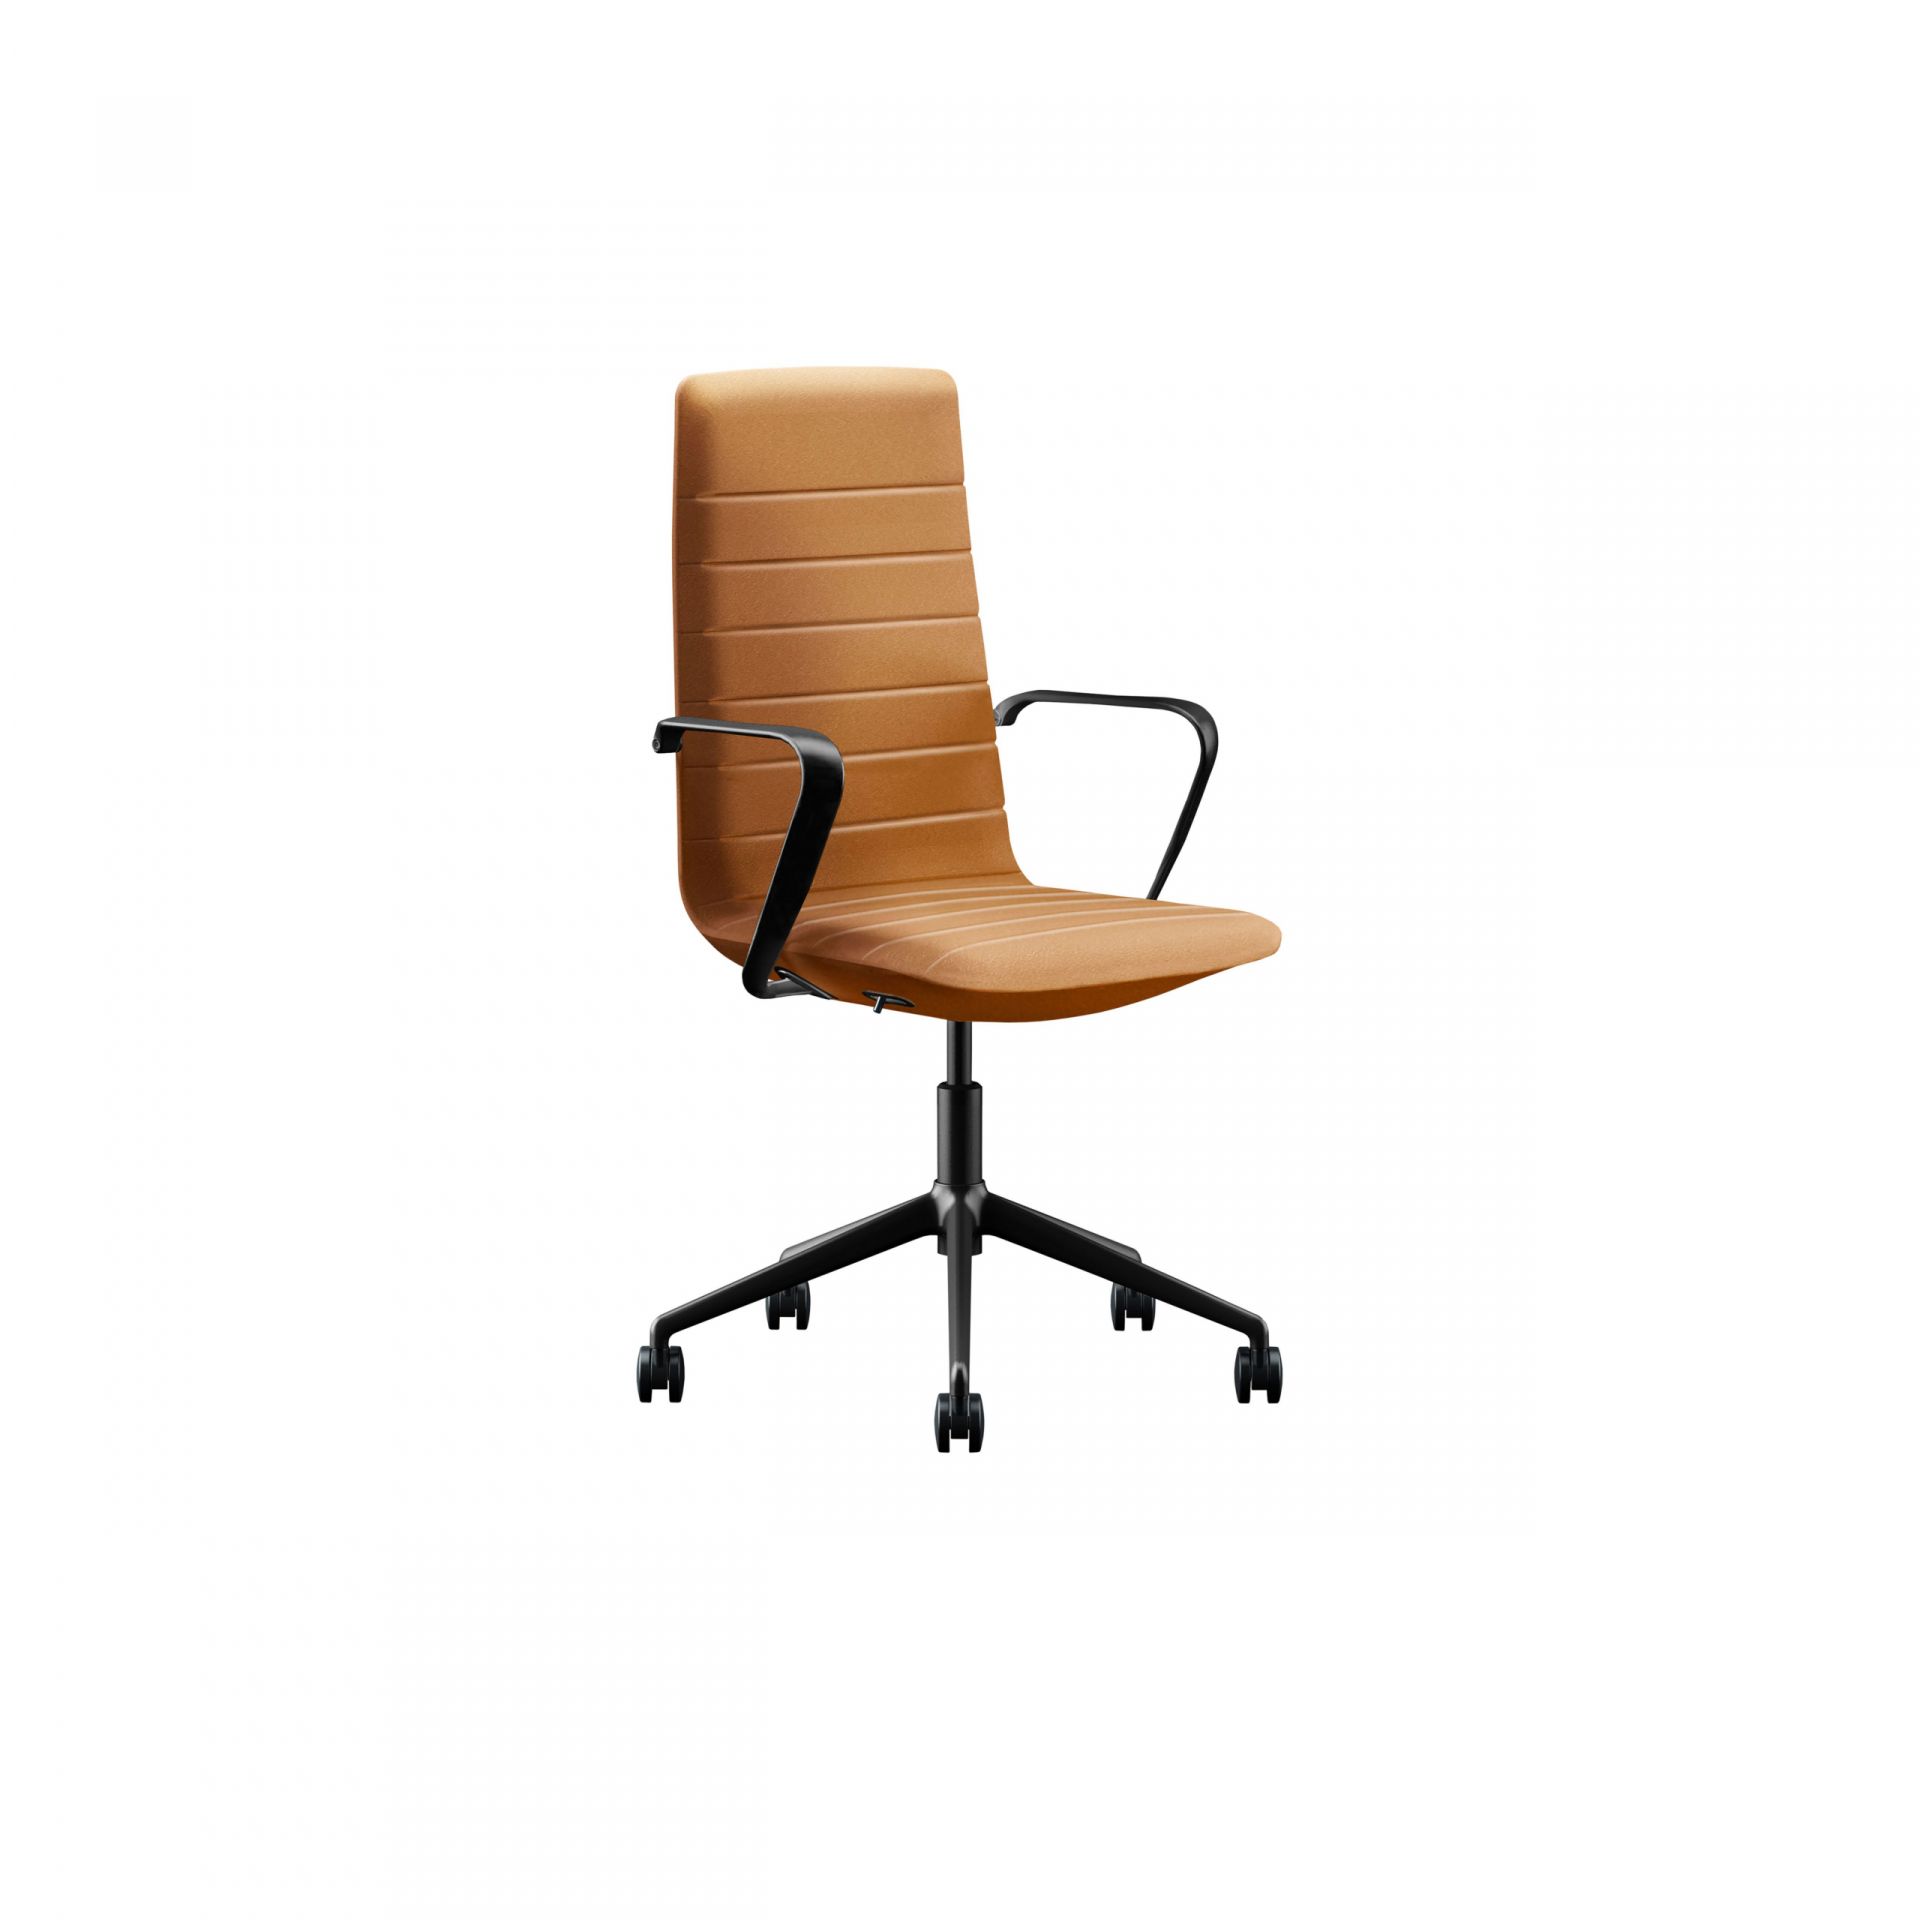 Favor Chair with swivel base product image 1